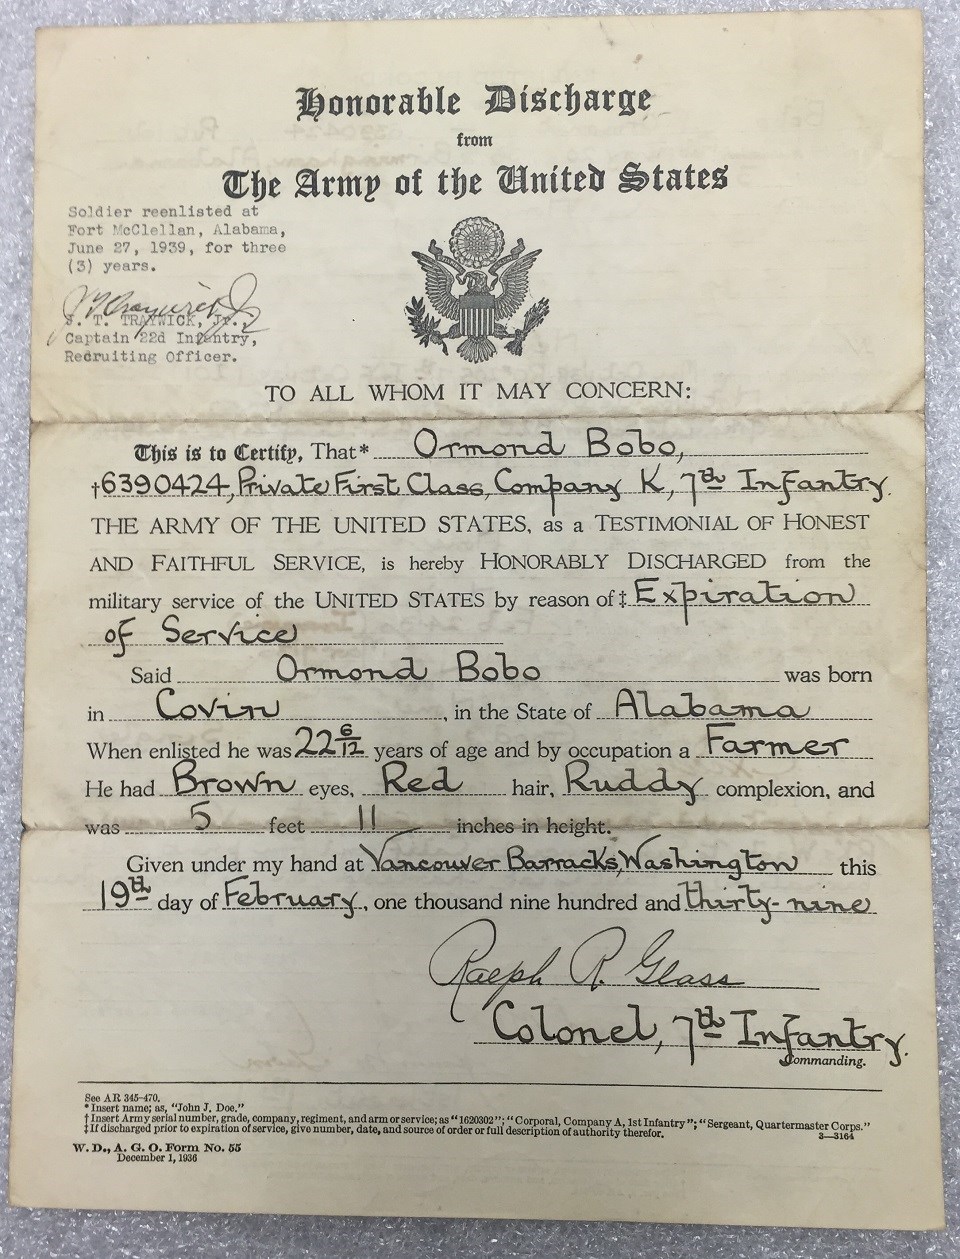 Photo of discharge document.